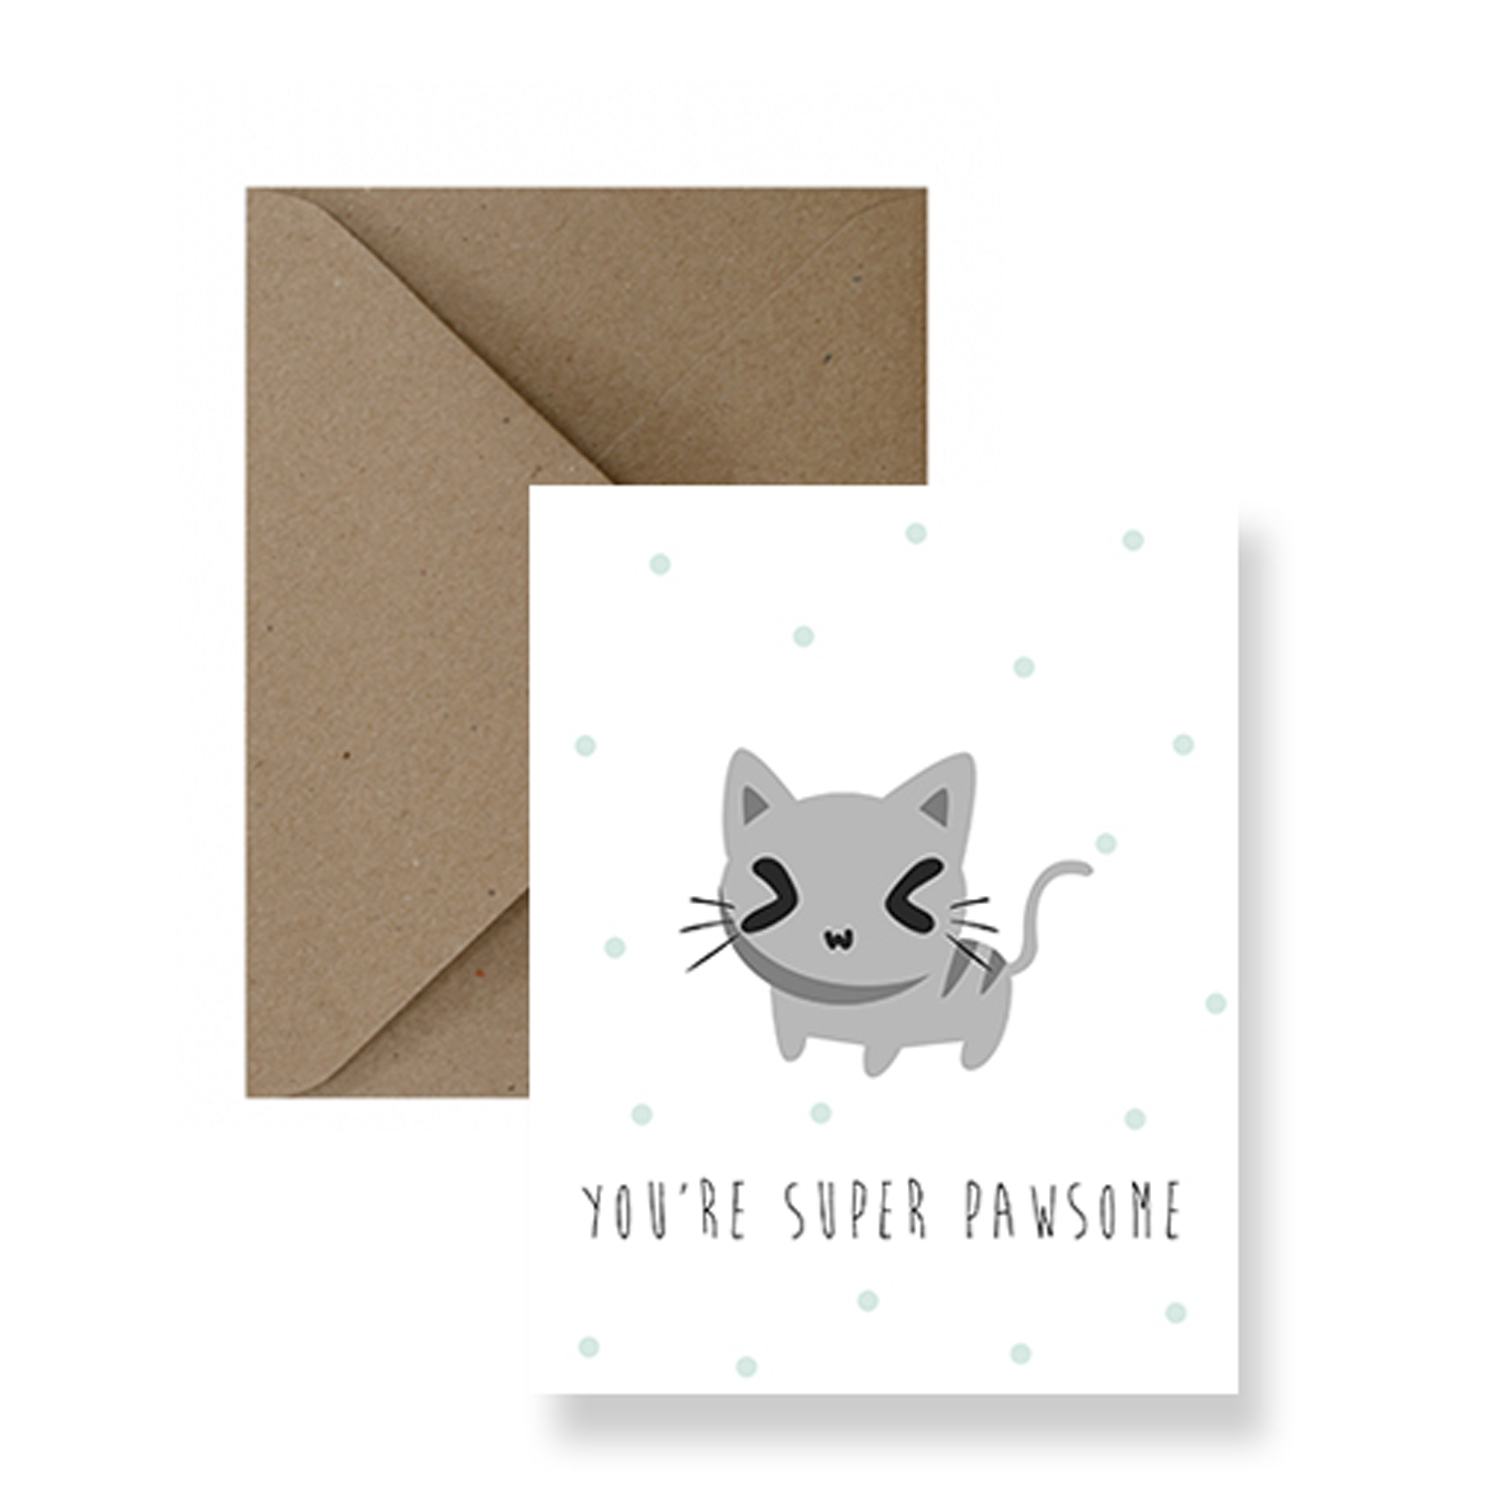 IMPAPER: Super Pawsome Card Product Image 1 of 4